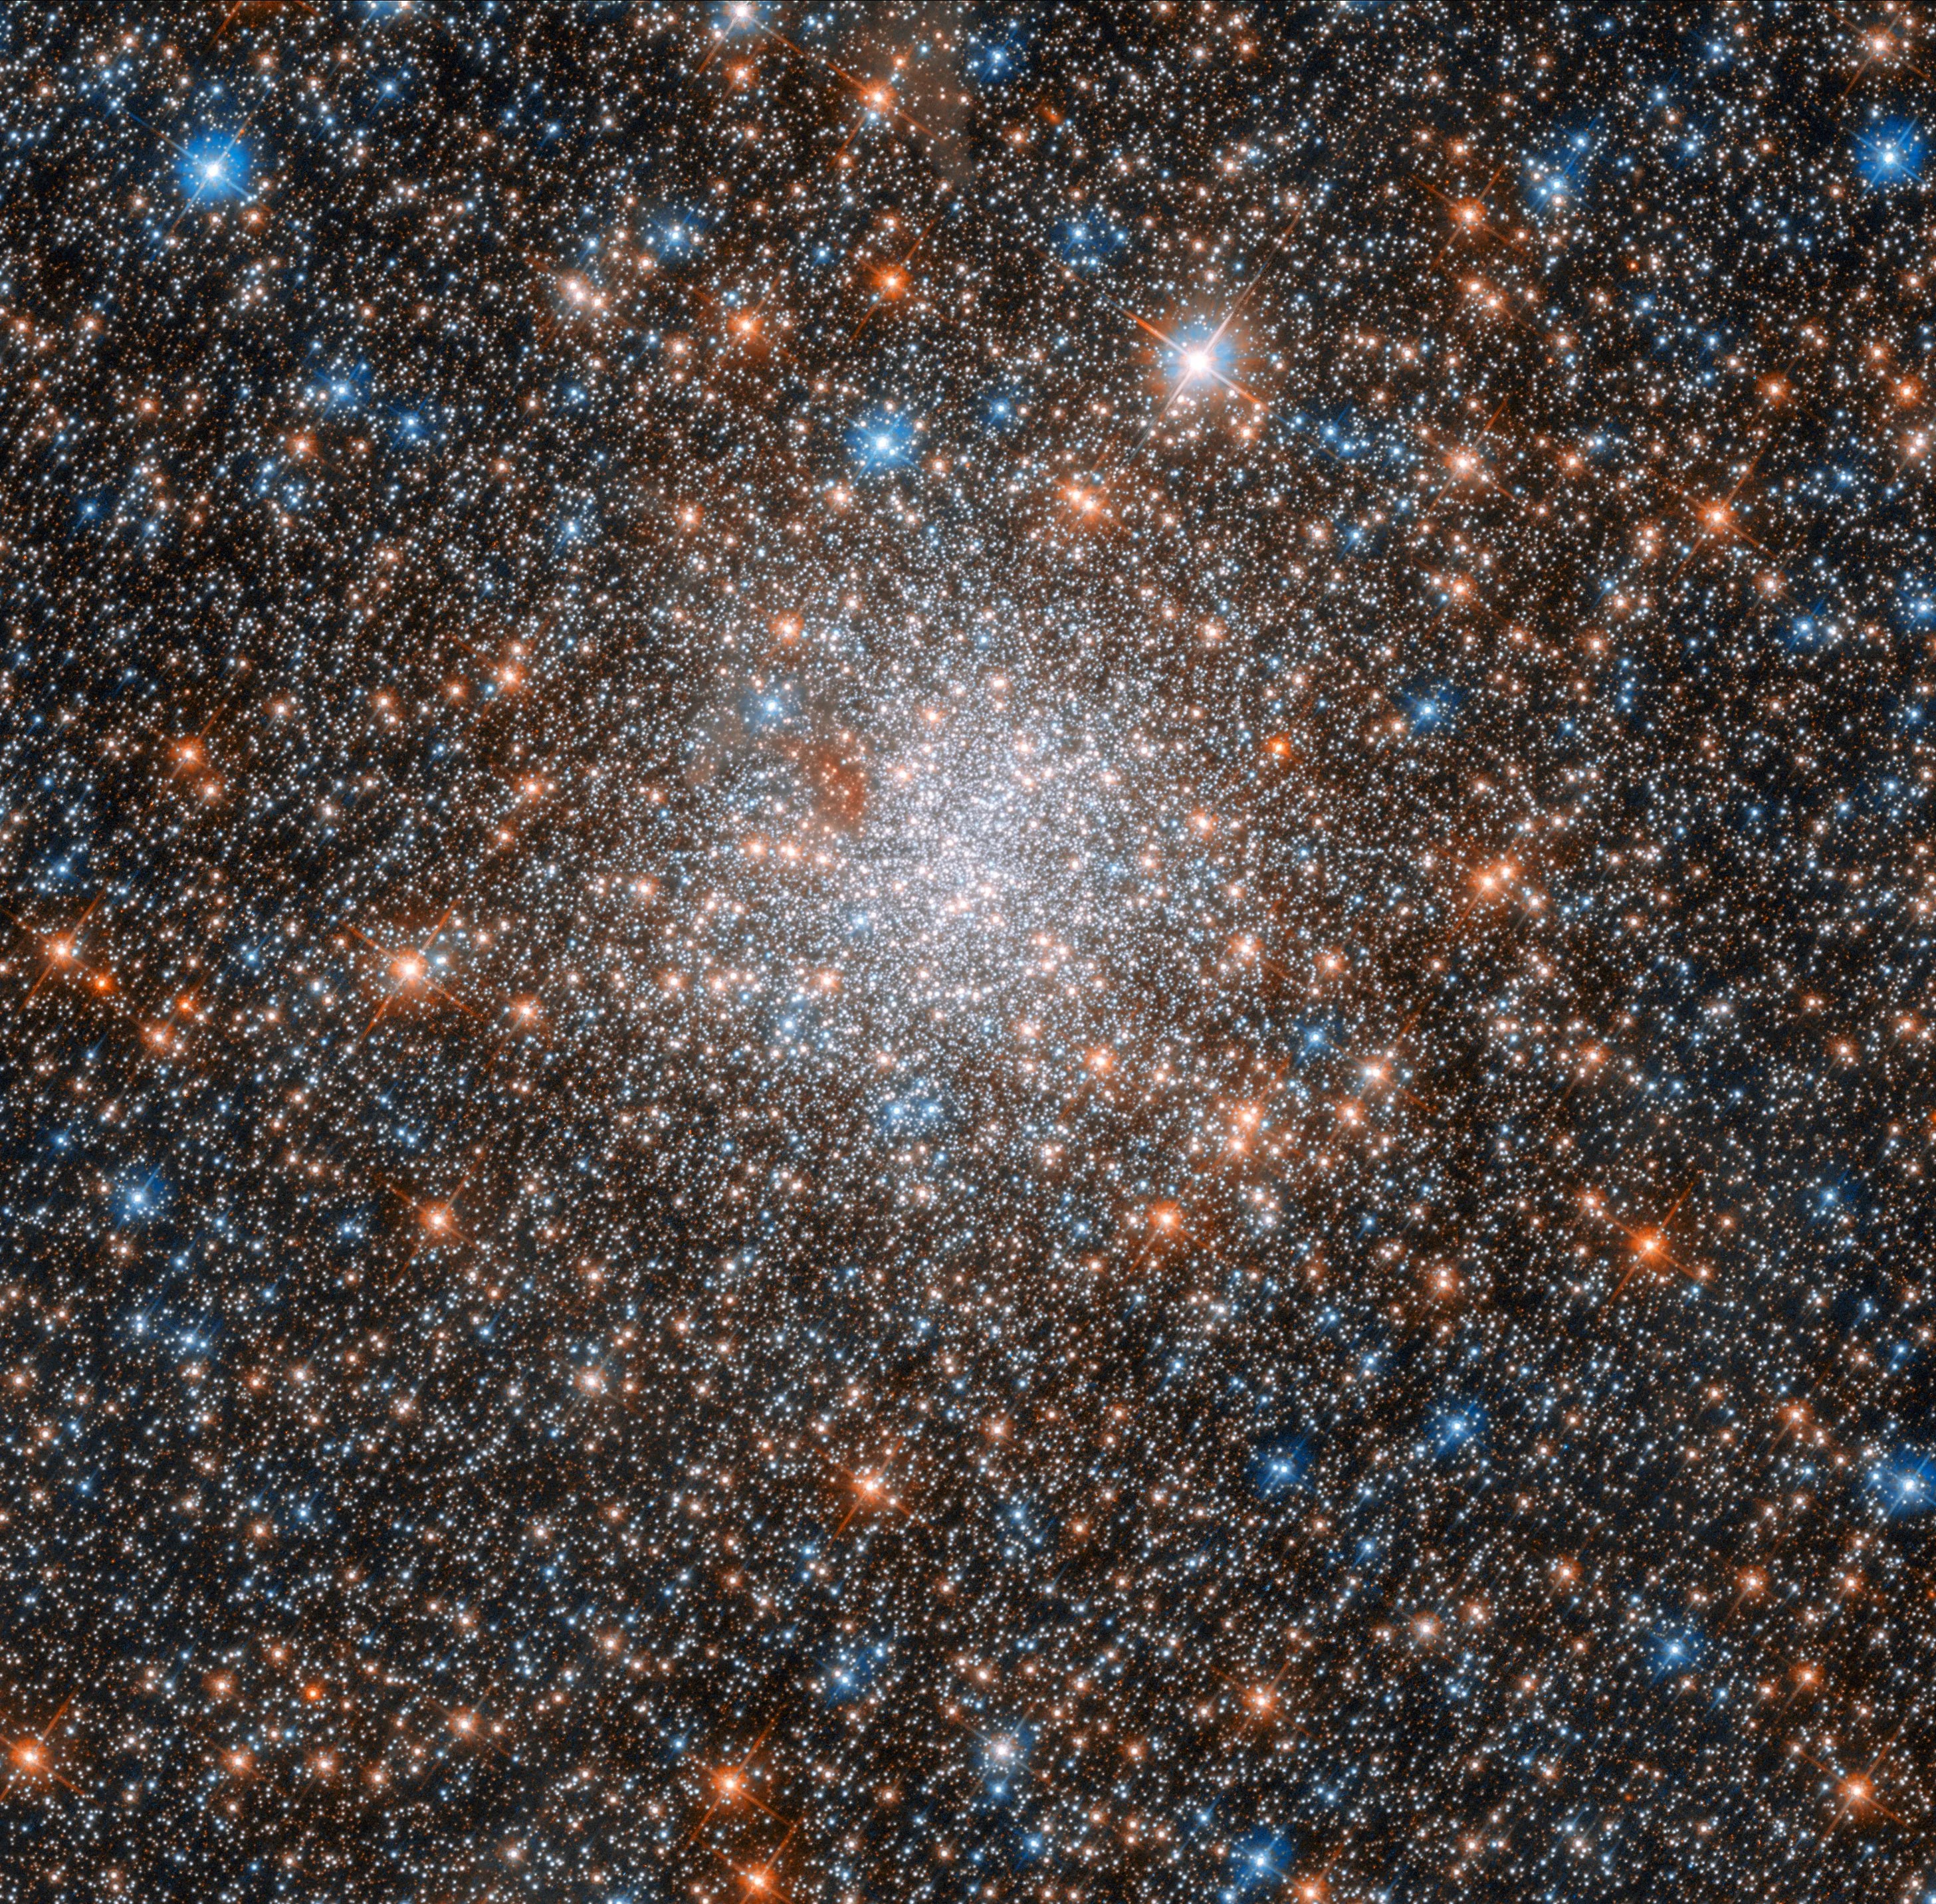 Bright cluster of stars in a crowded field